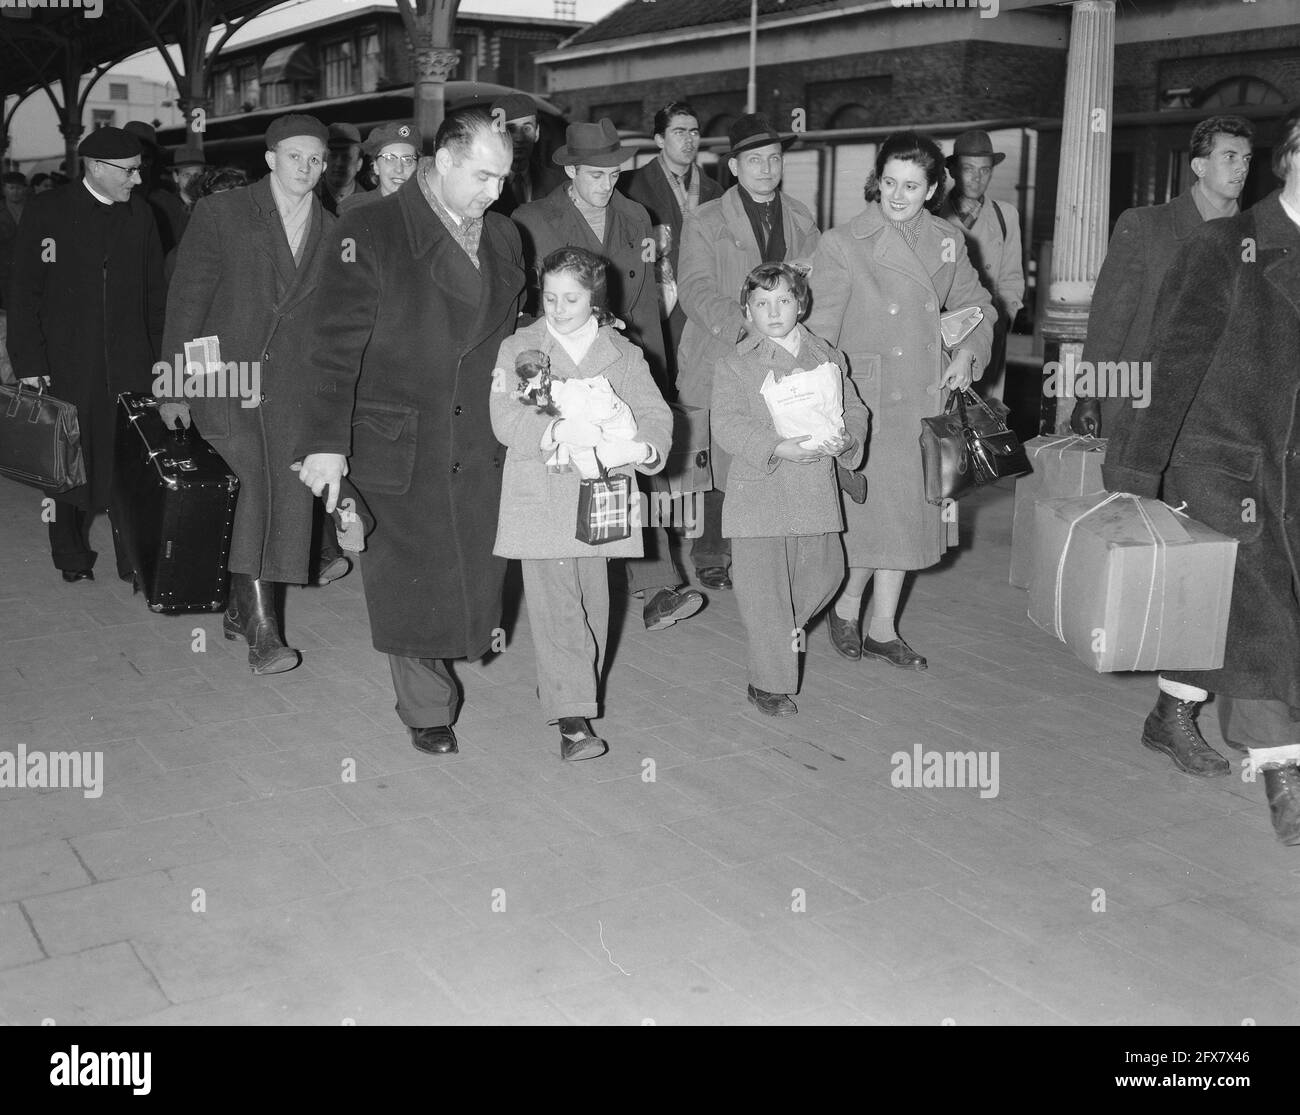 Arrival last transport of Hungarian refugees, December 17, 1956, ARRIVAL, FLIGHTS, The Netherlands, 20th century press agency photo, news to remember, documentary, historic photography 1945-1990, visual stories, human history of the Twentieth Century, capturing moments in time Stock Photo